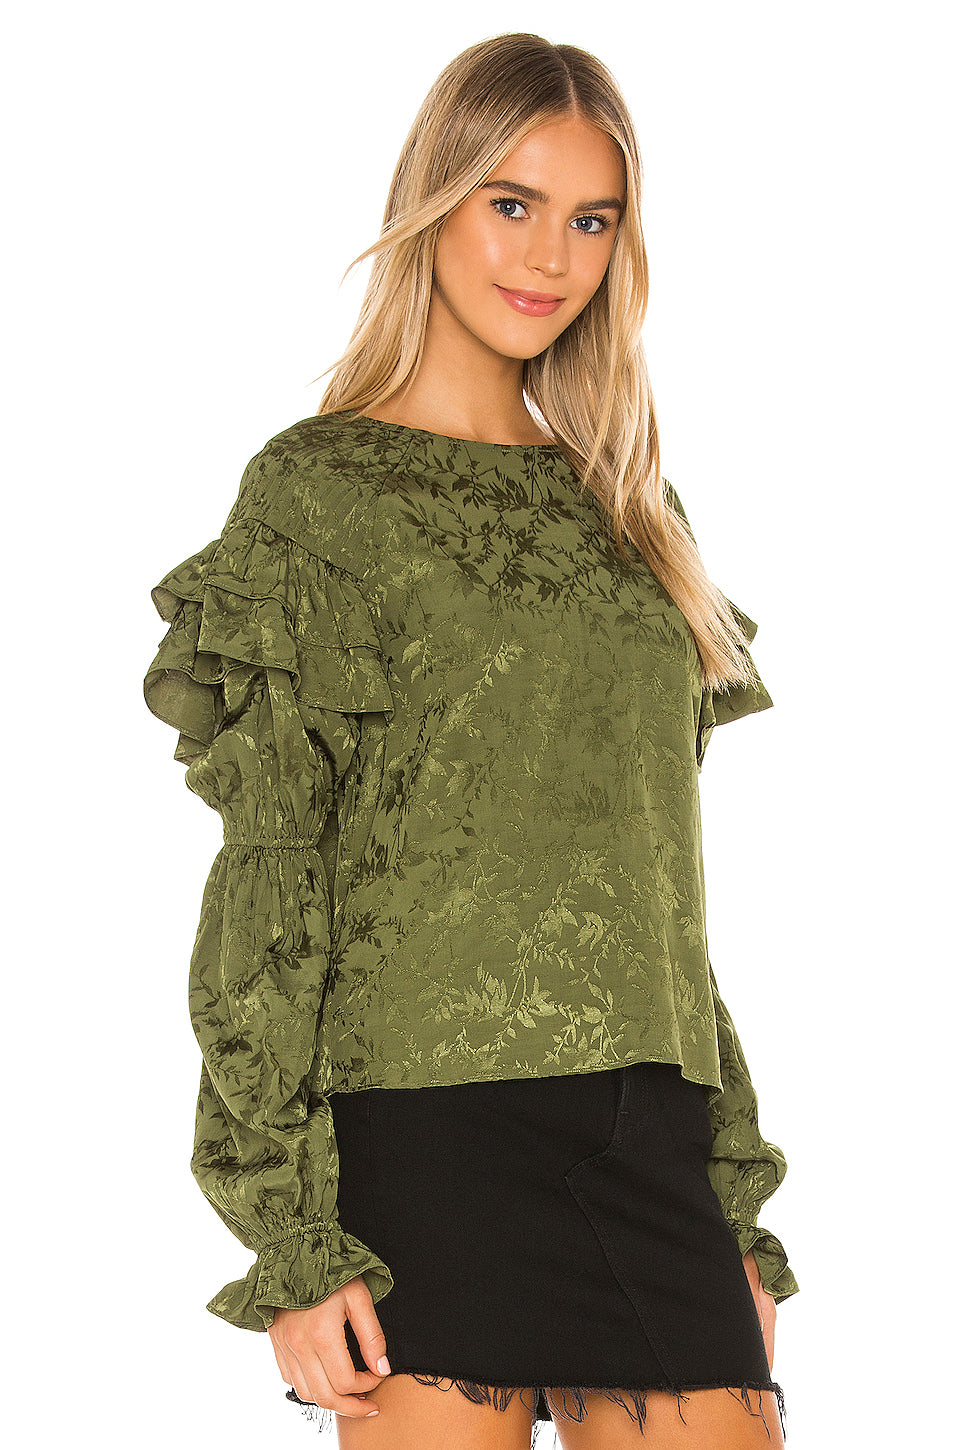 Eloise Top in OLIVE GREEN